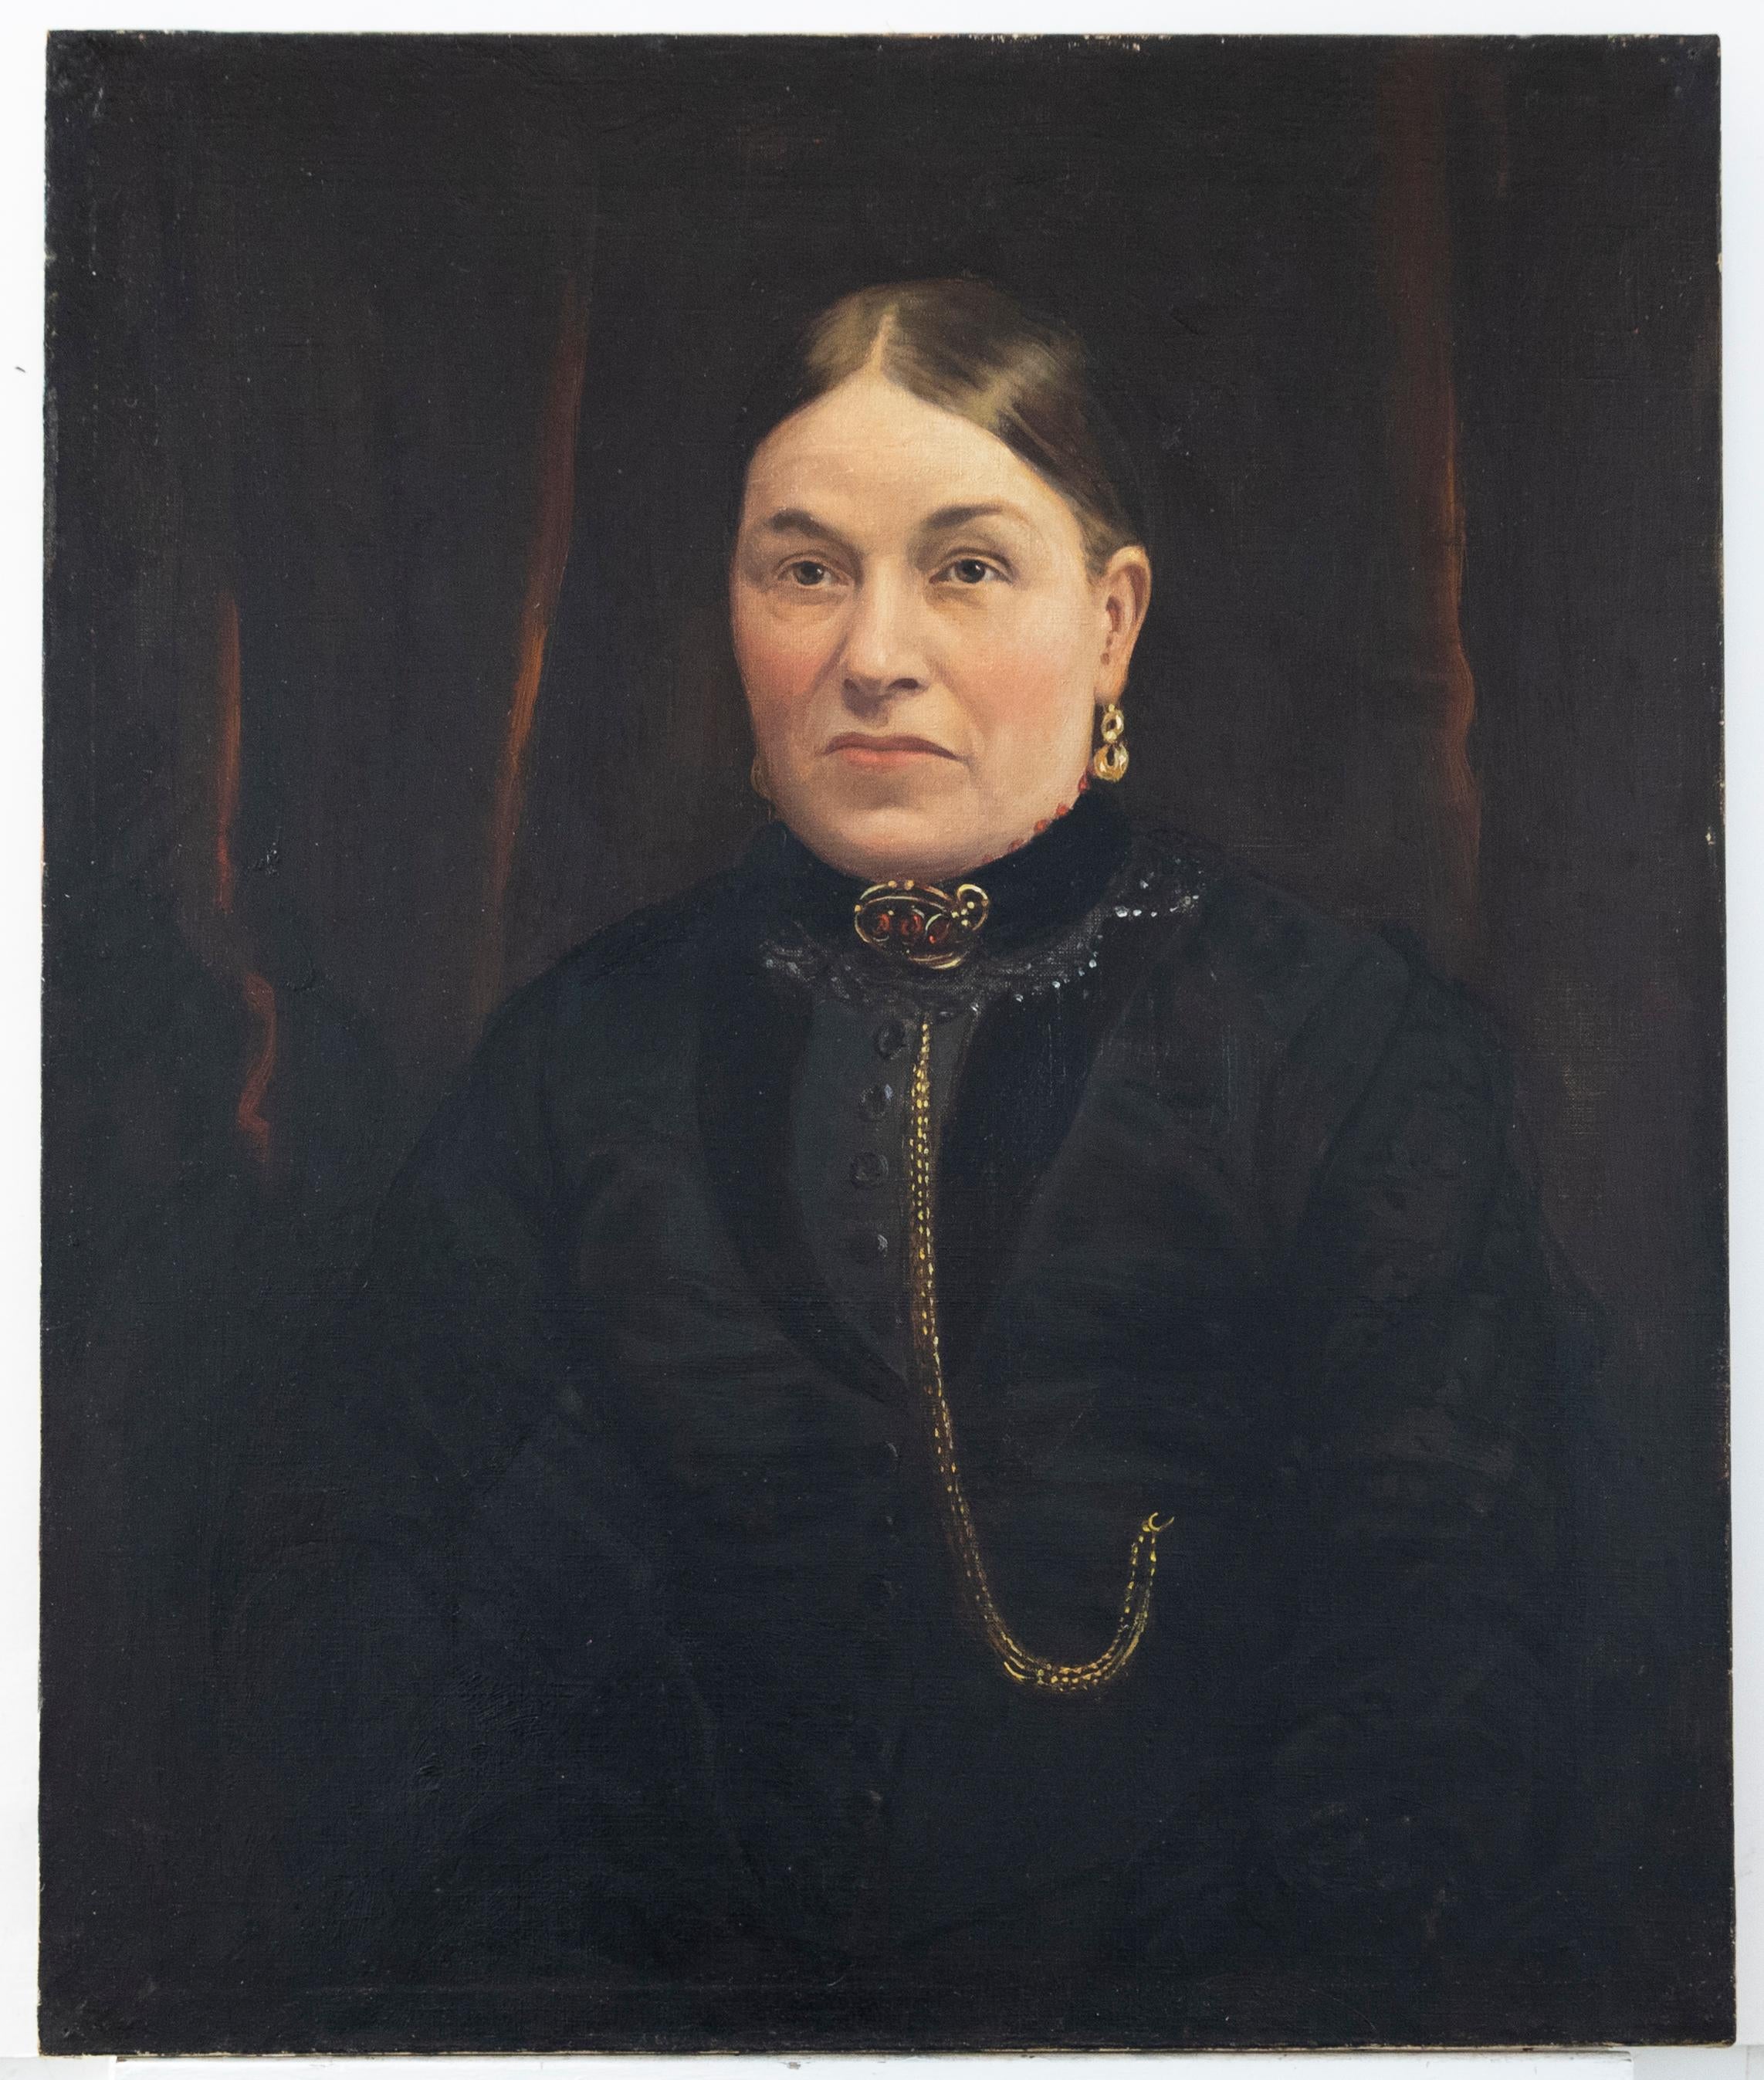 An impressive late Victorian portrait of a stern looking lady in mourning. The sitter wears an all black gown, buttoned down the front with a high lace collar. Pinned to the front of her outfit is a fine ruby and gold brooch, sitting proud with a